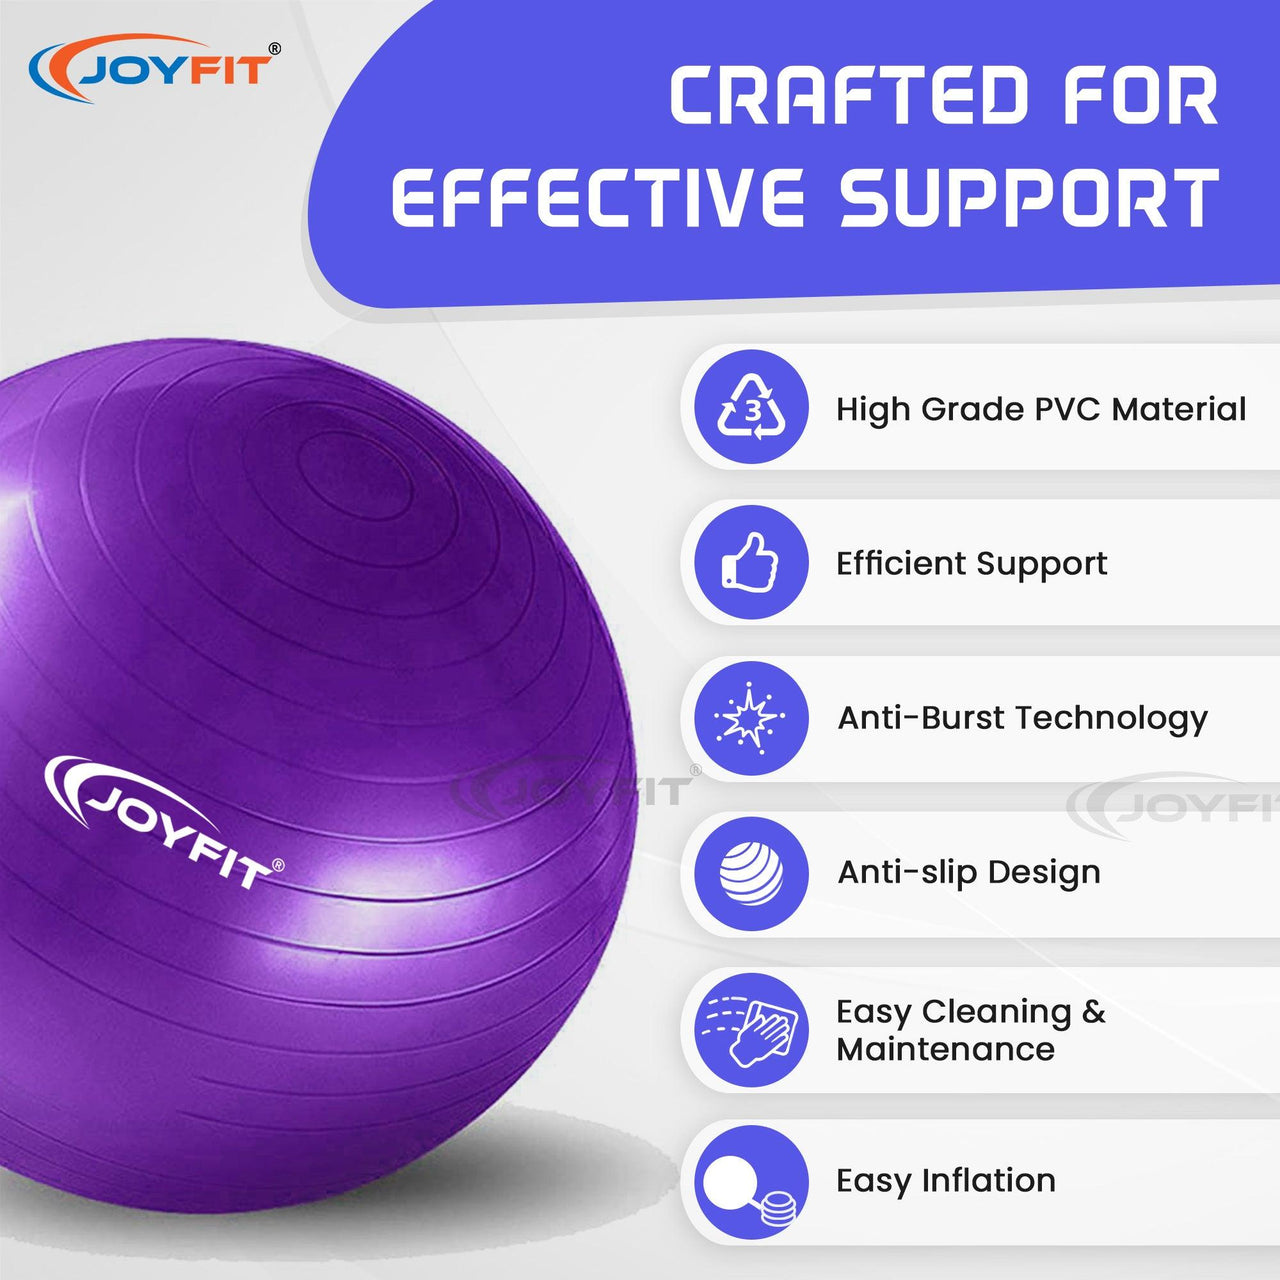 Yoga Ball Features